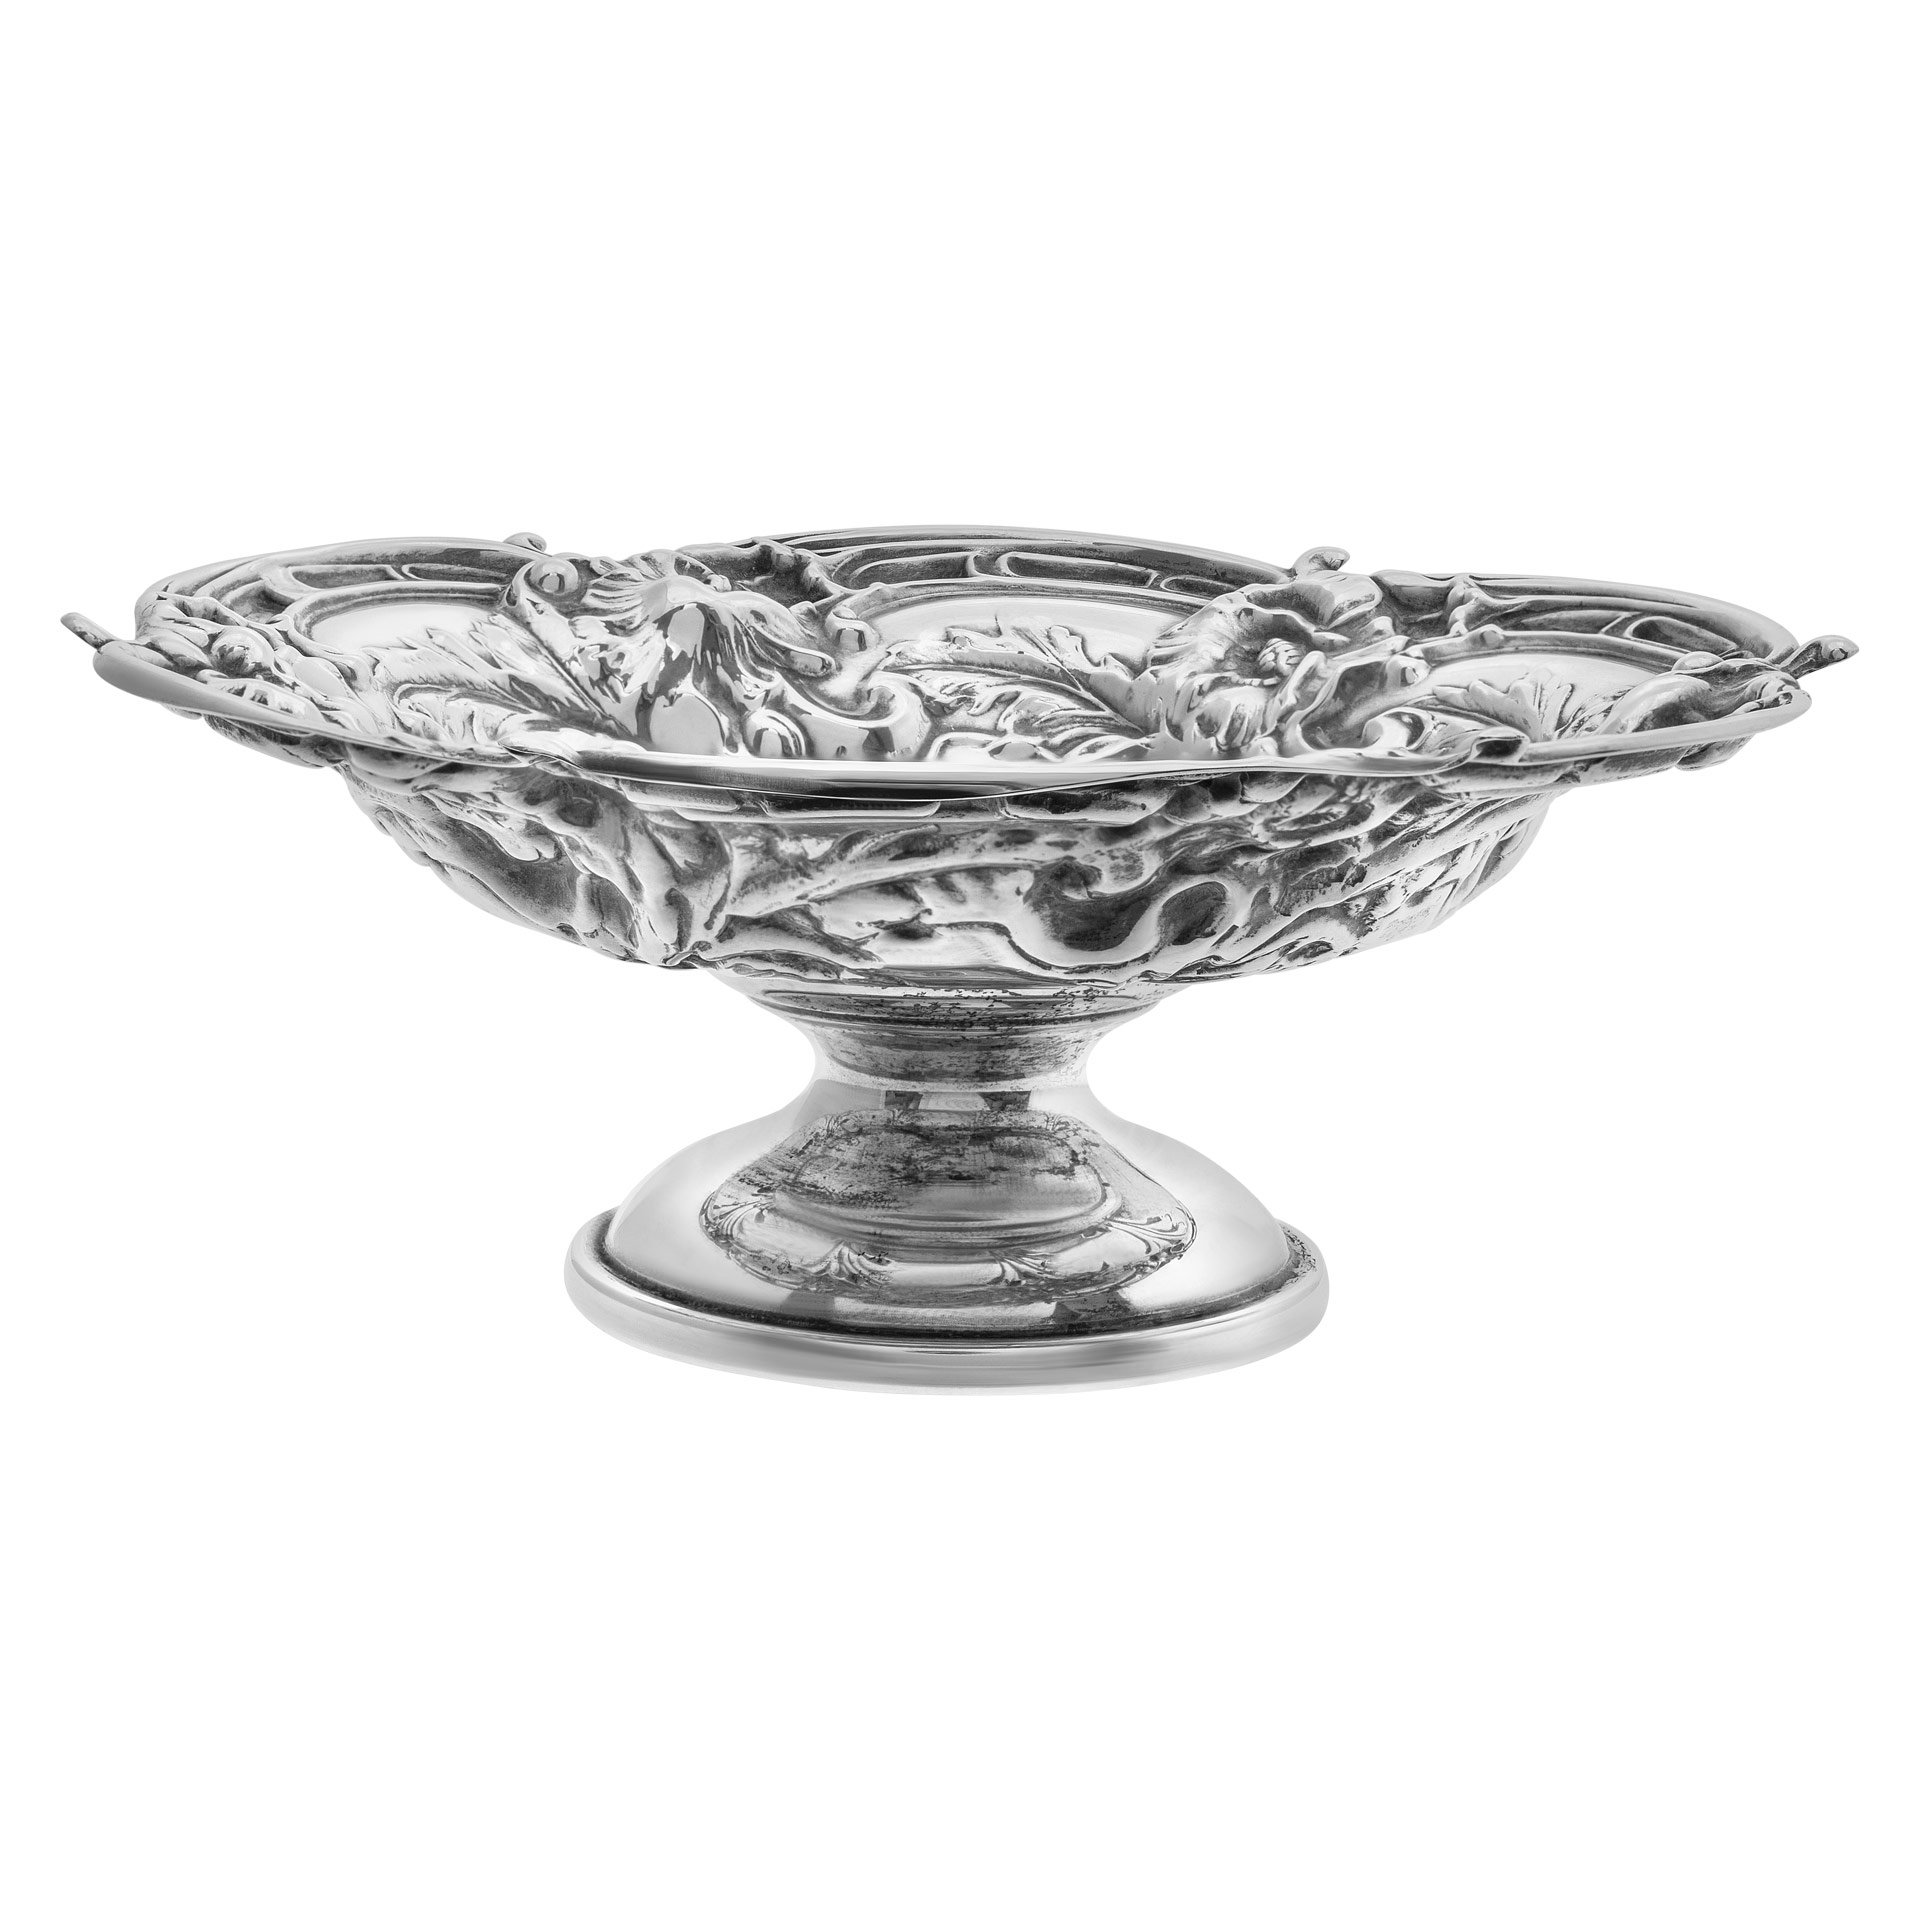 "Les Cinq Fleurs" patented in 1900 by Reed & Barton, sterling silver bon bon dish. image 1